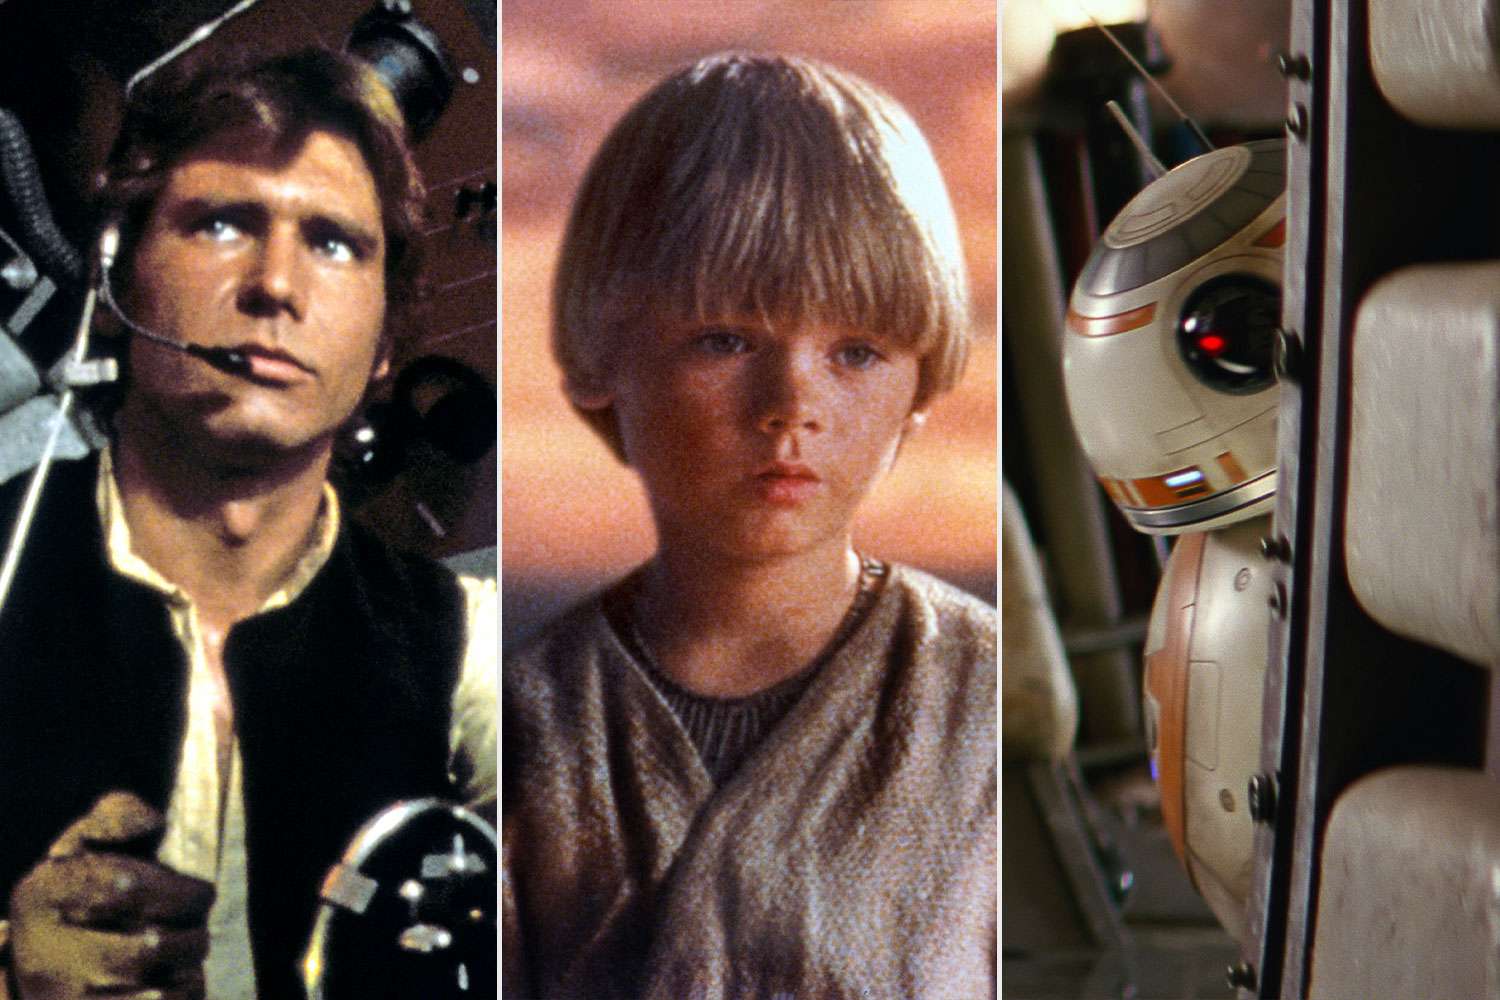 Which 'Star Wars' movie was the biggest box office hit? Here's how much each film made